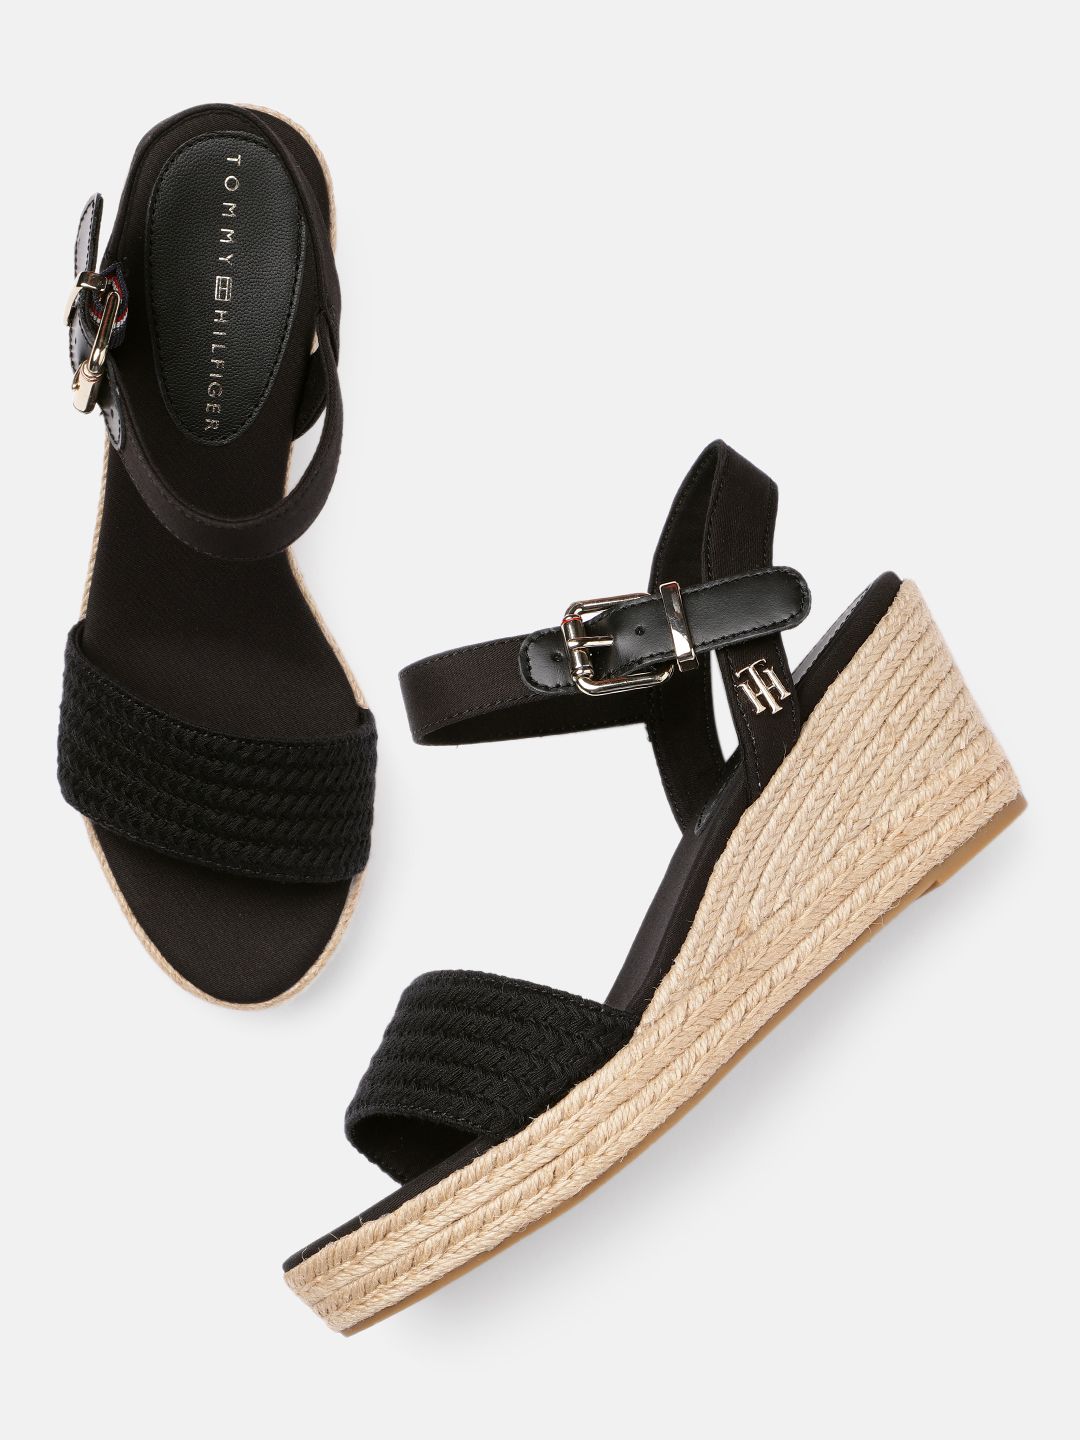 Tommy Hilfiger Women Black Wedge Sandals Price in India